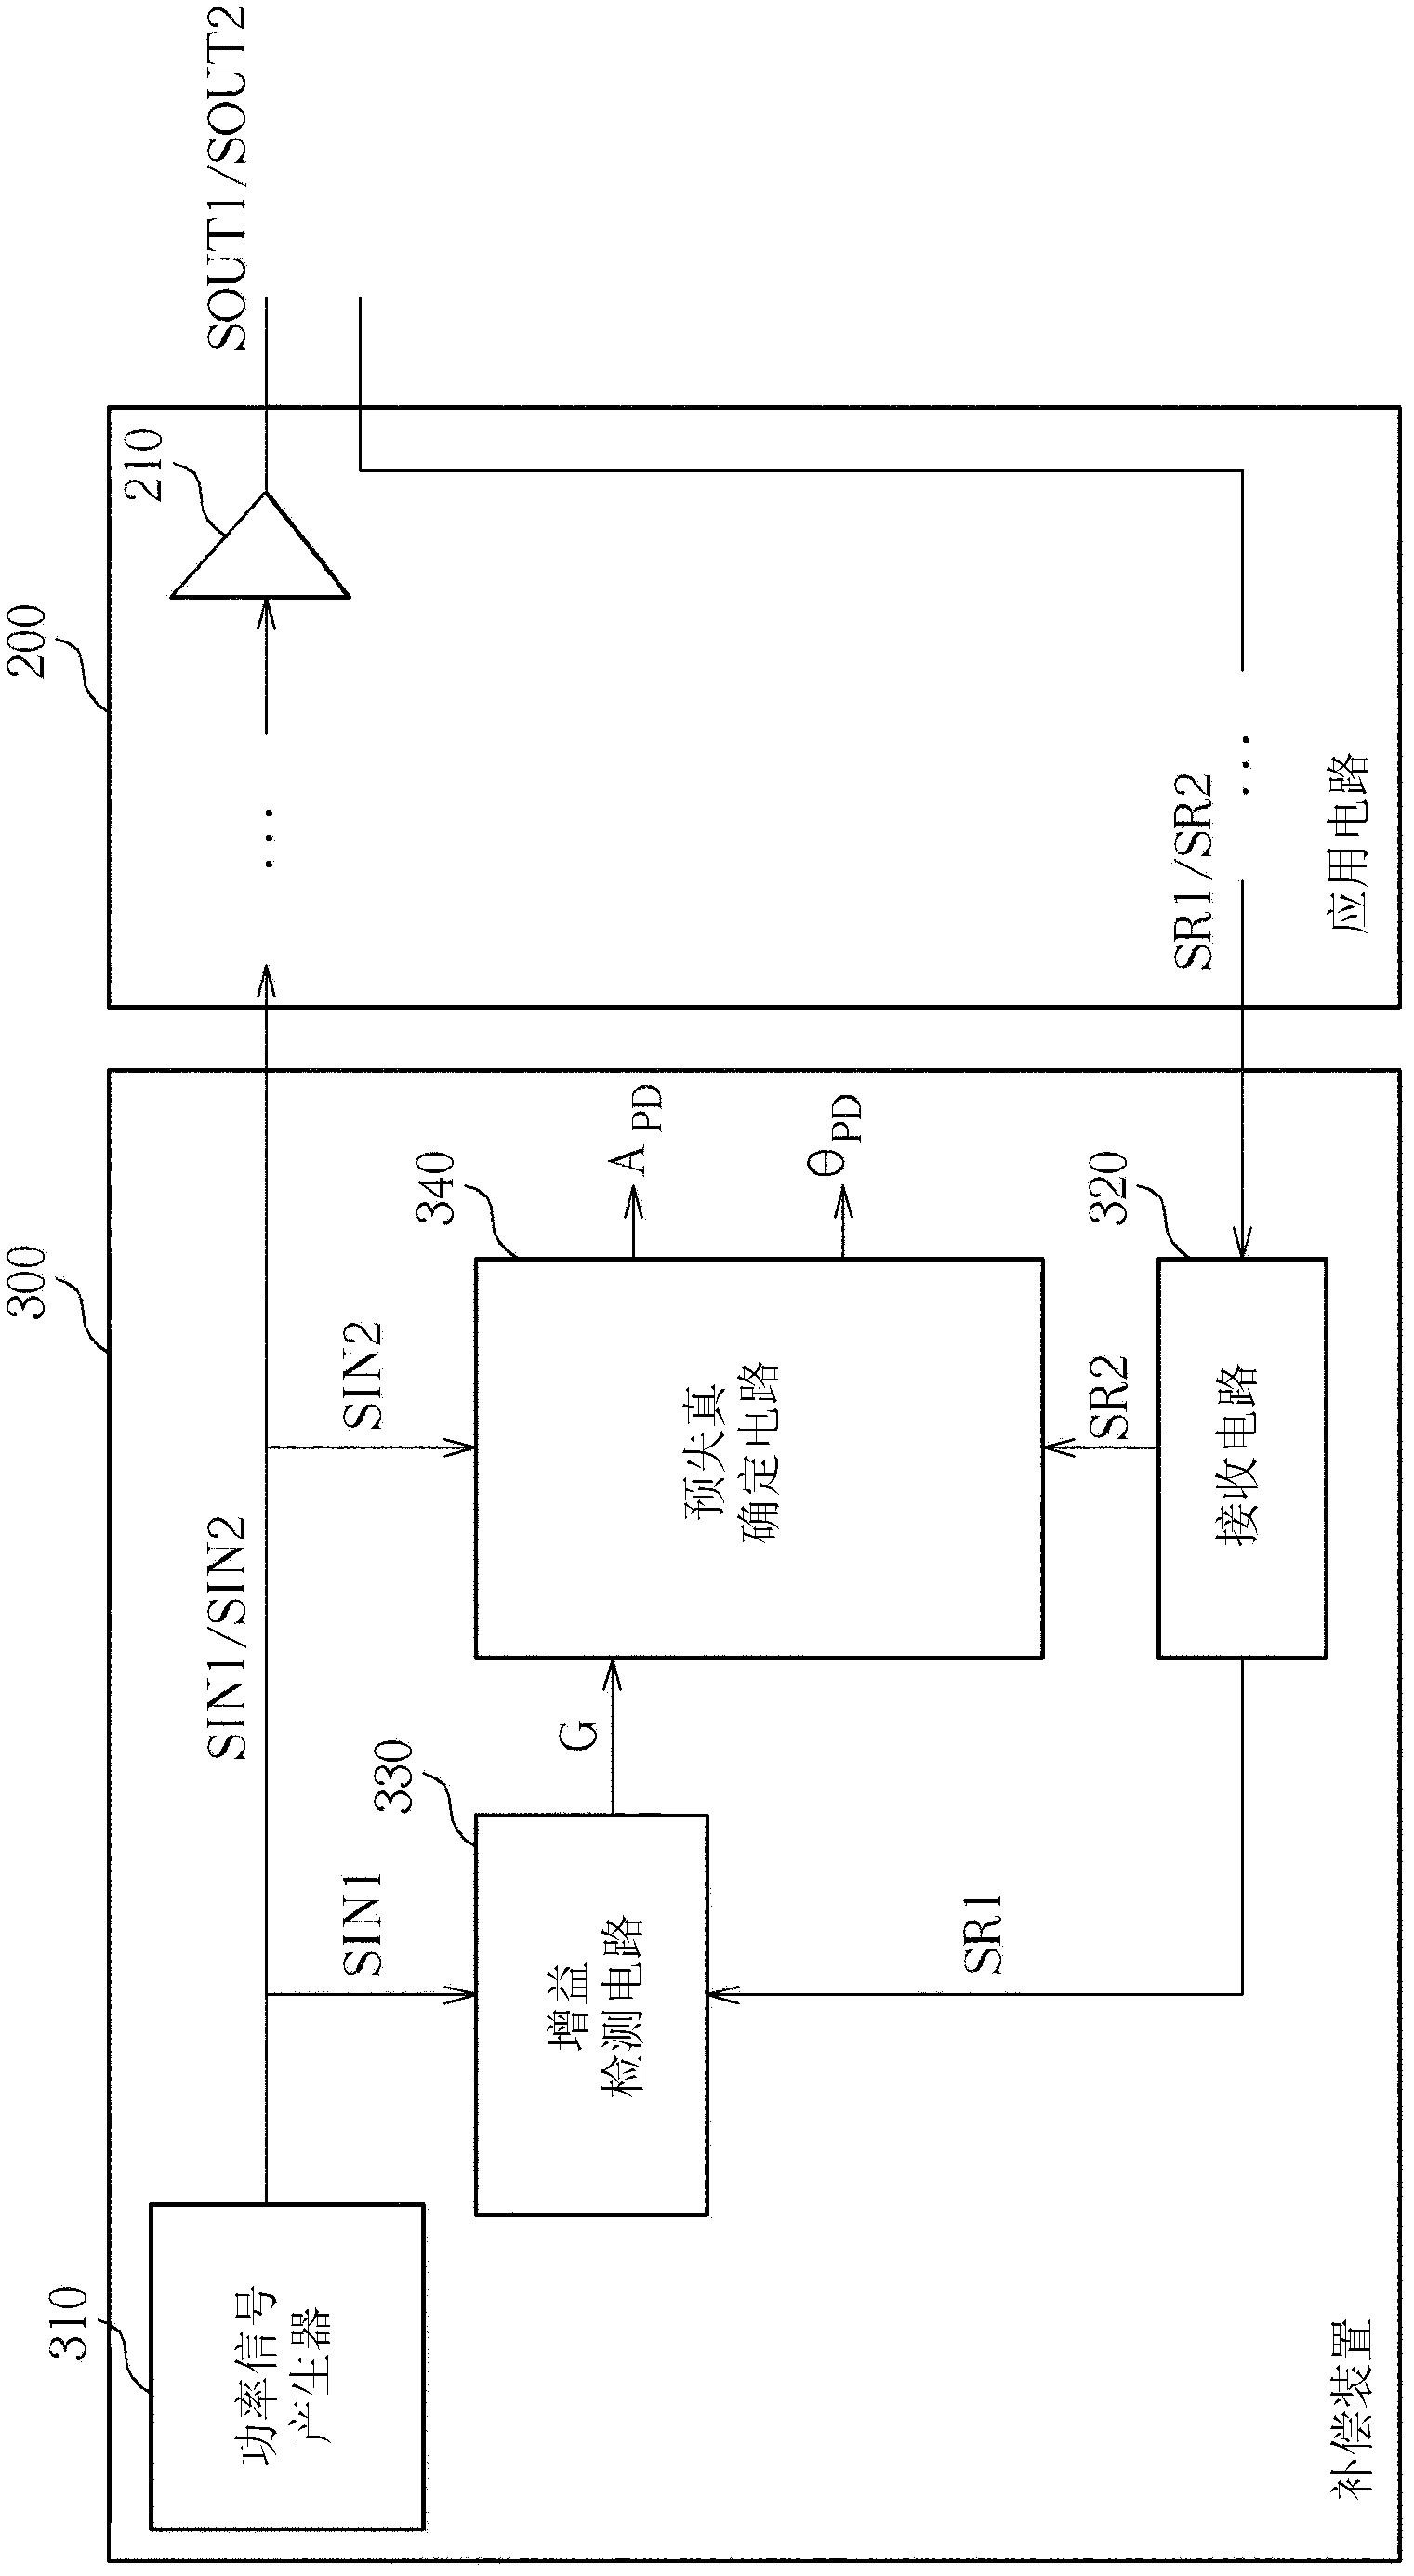 Compensation device for power amplifier and related method